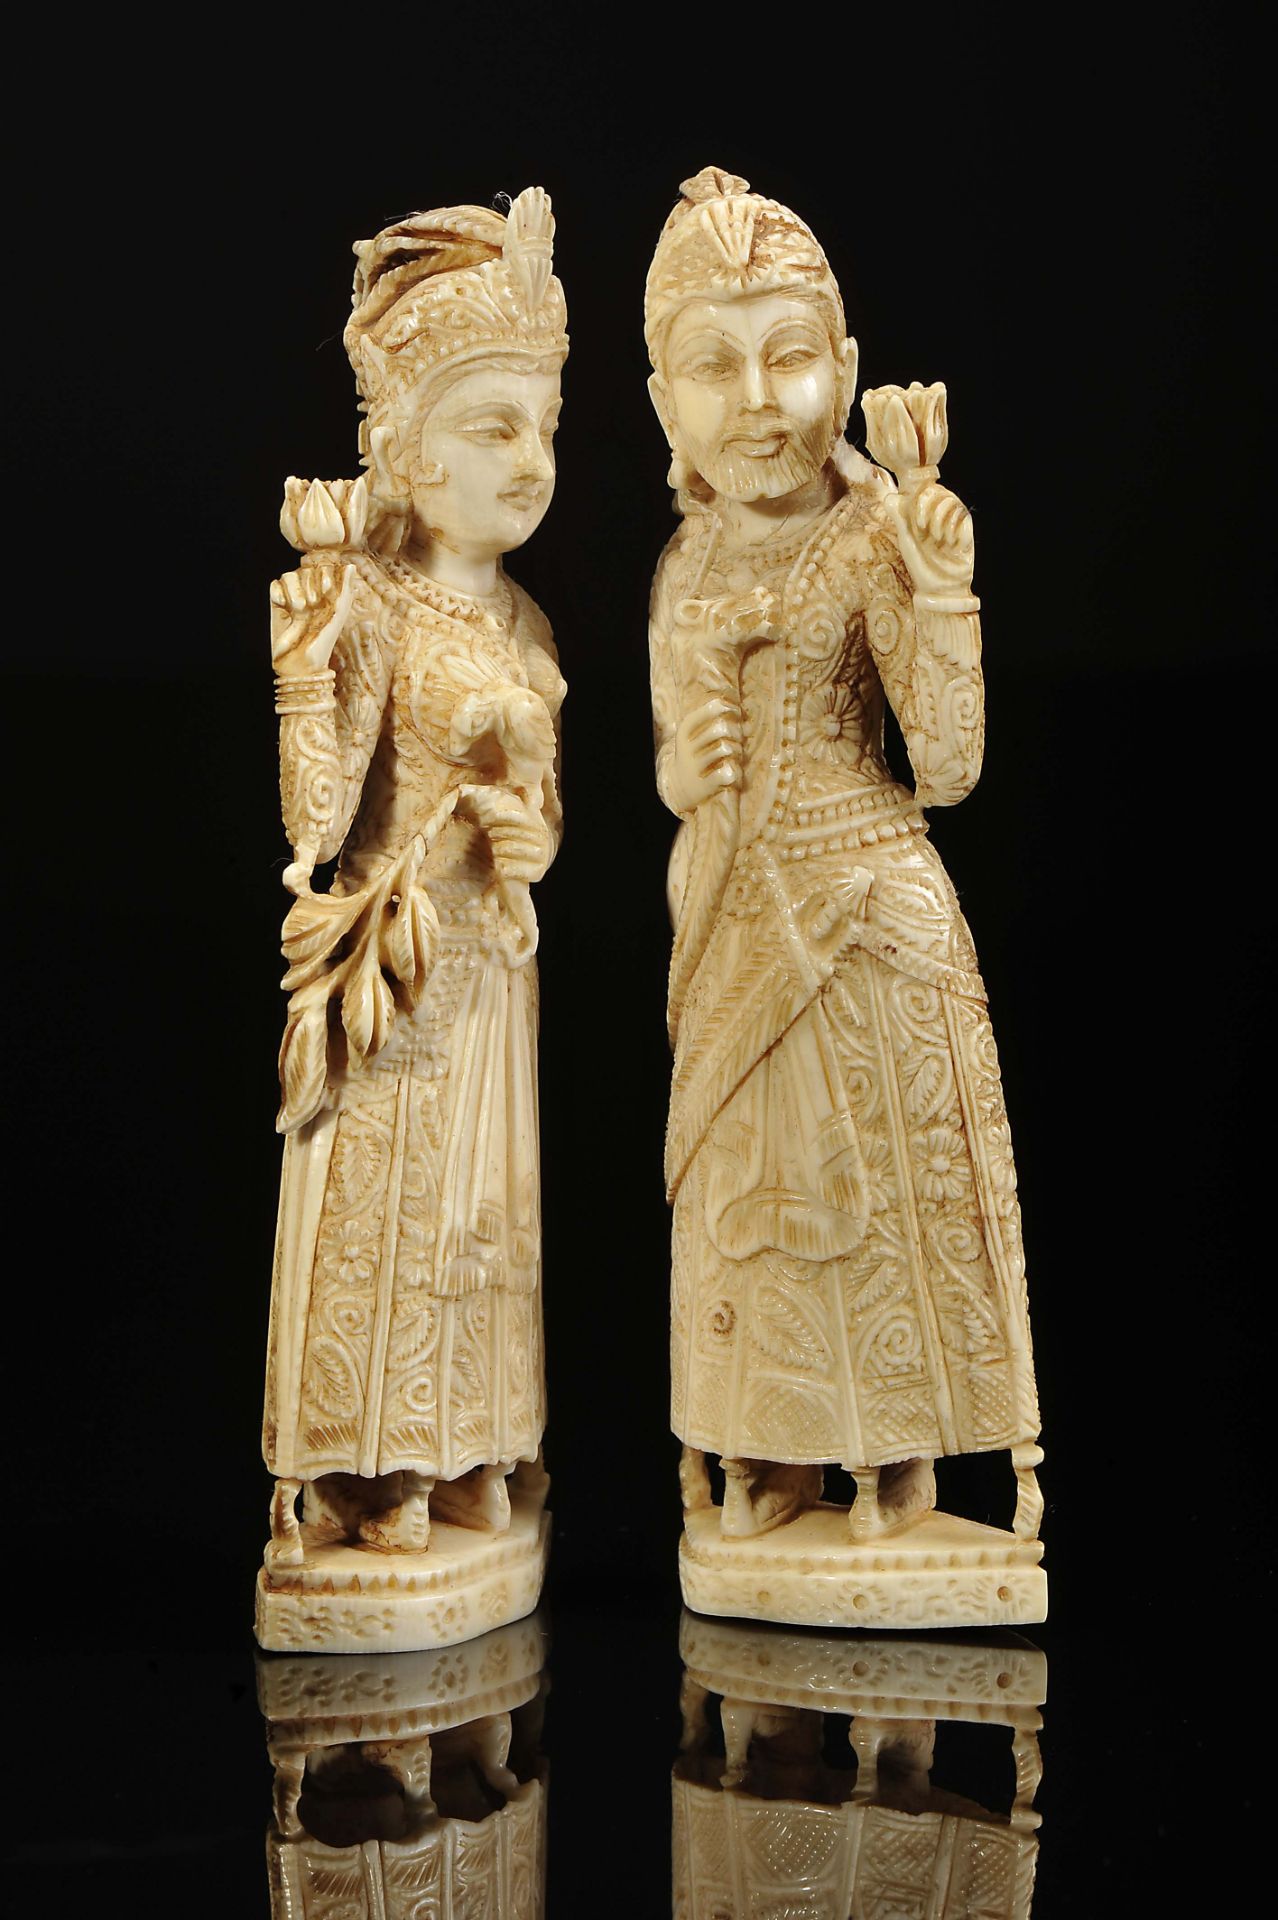 Chess Pieces Mughal Emperor and Empress - Image 3 of 4